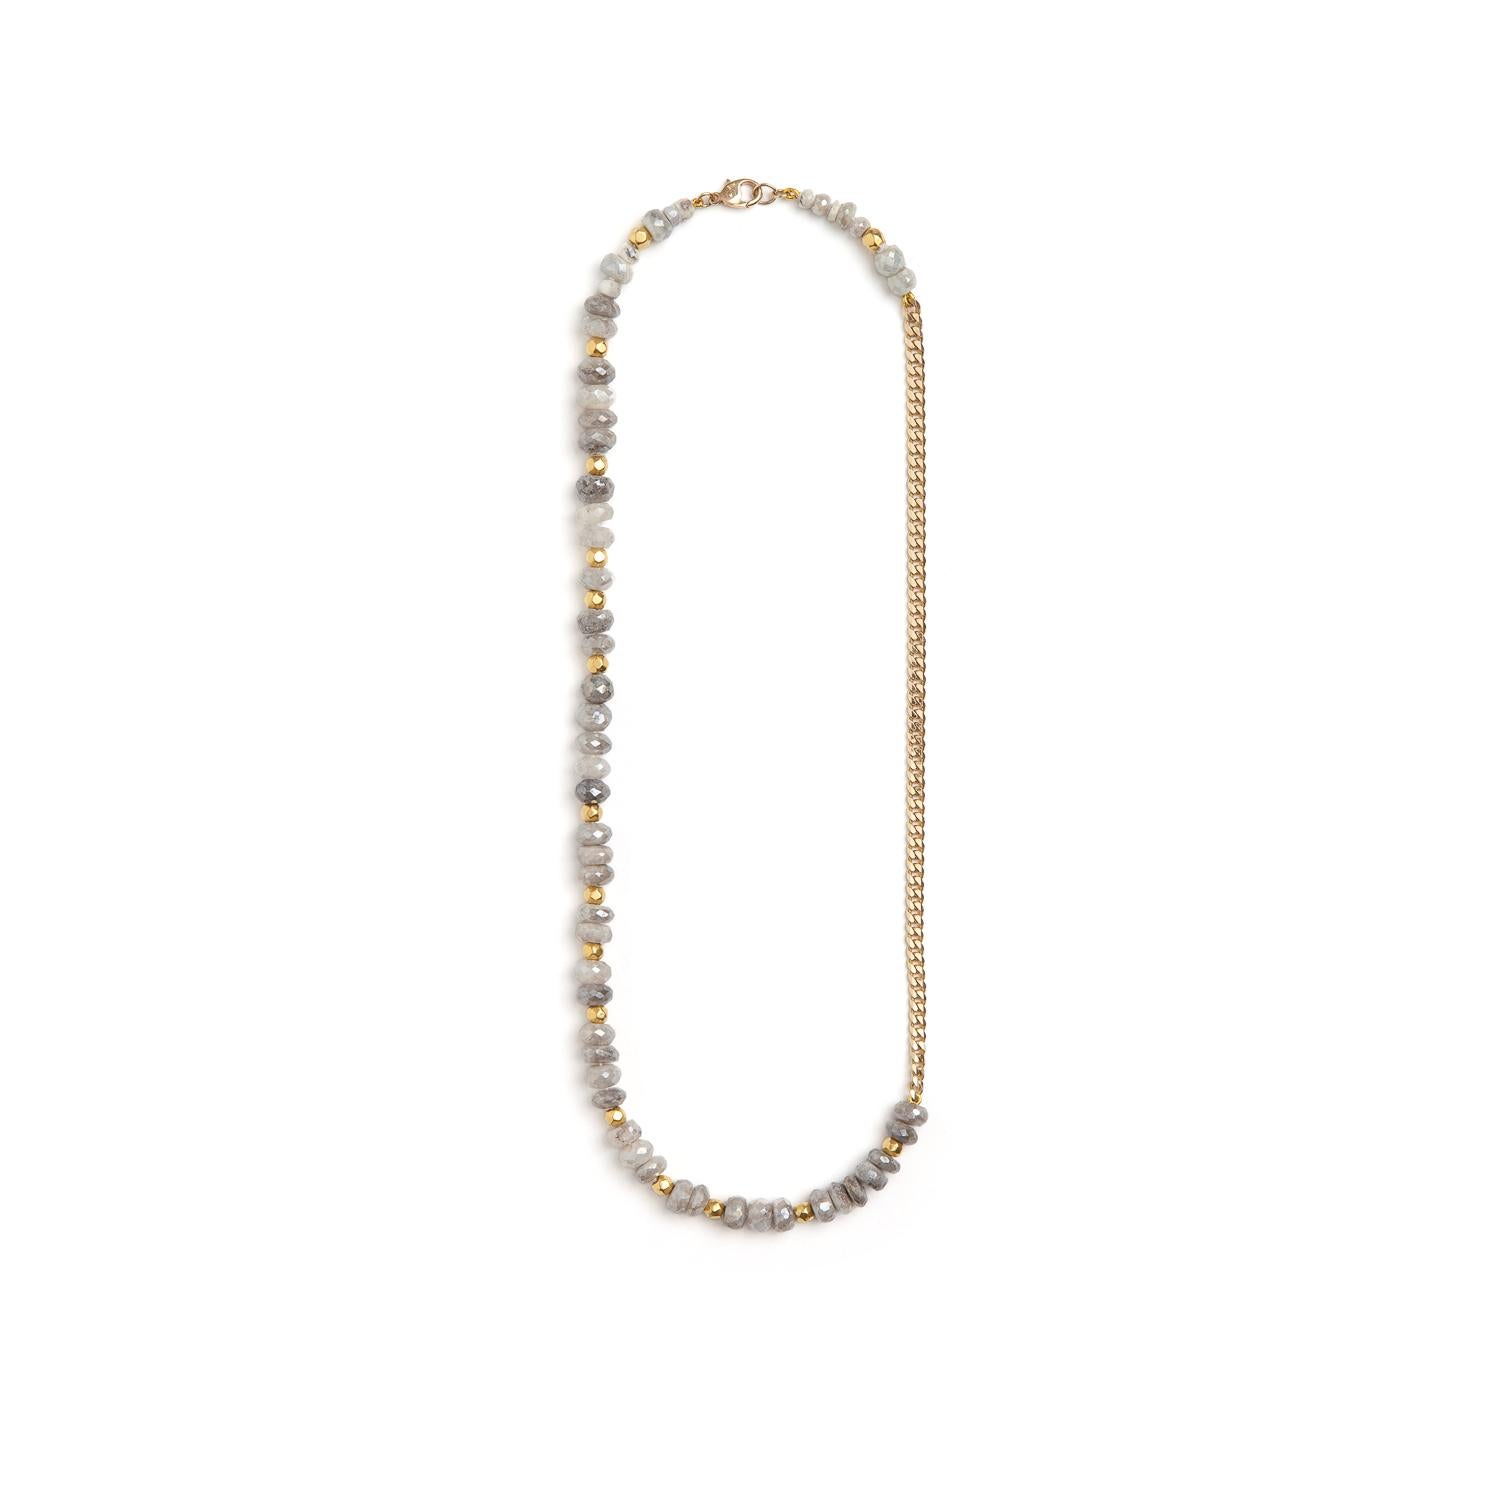 Hand-knotted beaded necklace composed of large white sapphire beads and 18k yellow gold beads, set on a heavy 18k yellow gold curb chain. 
 
18 inches long
Sapphire beads
18k gold beads
18k yellow gold chain

Designed by Objet-a, hand-crafted in New